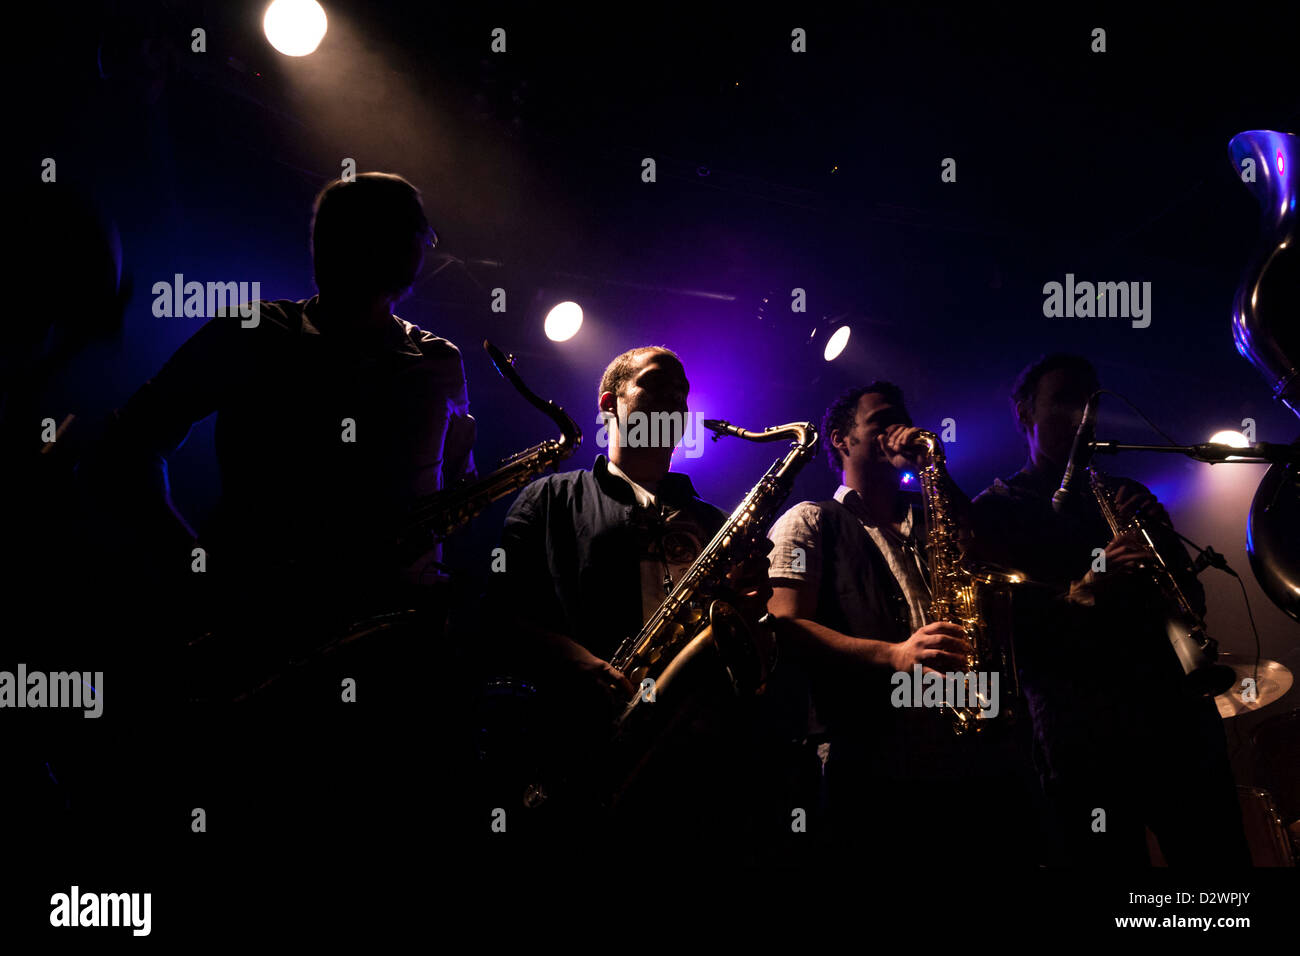 Saxophonists in a concert. High contrast, some are silhouetted. All are from Israeli Brass band 'Marsh Dondurma'. Stock Photo